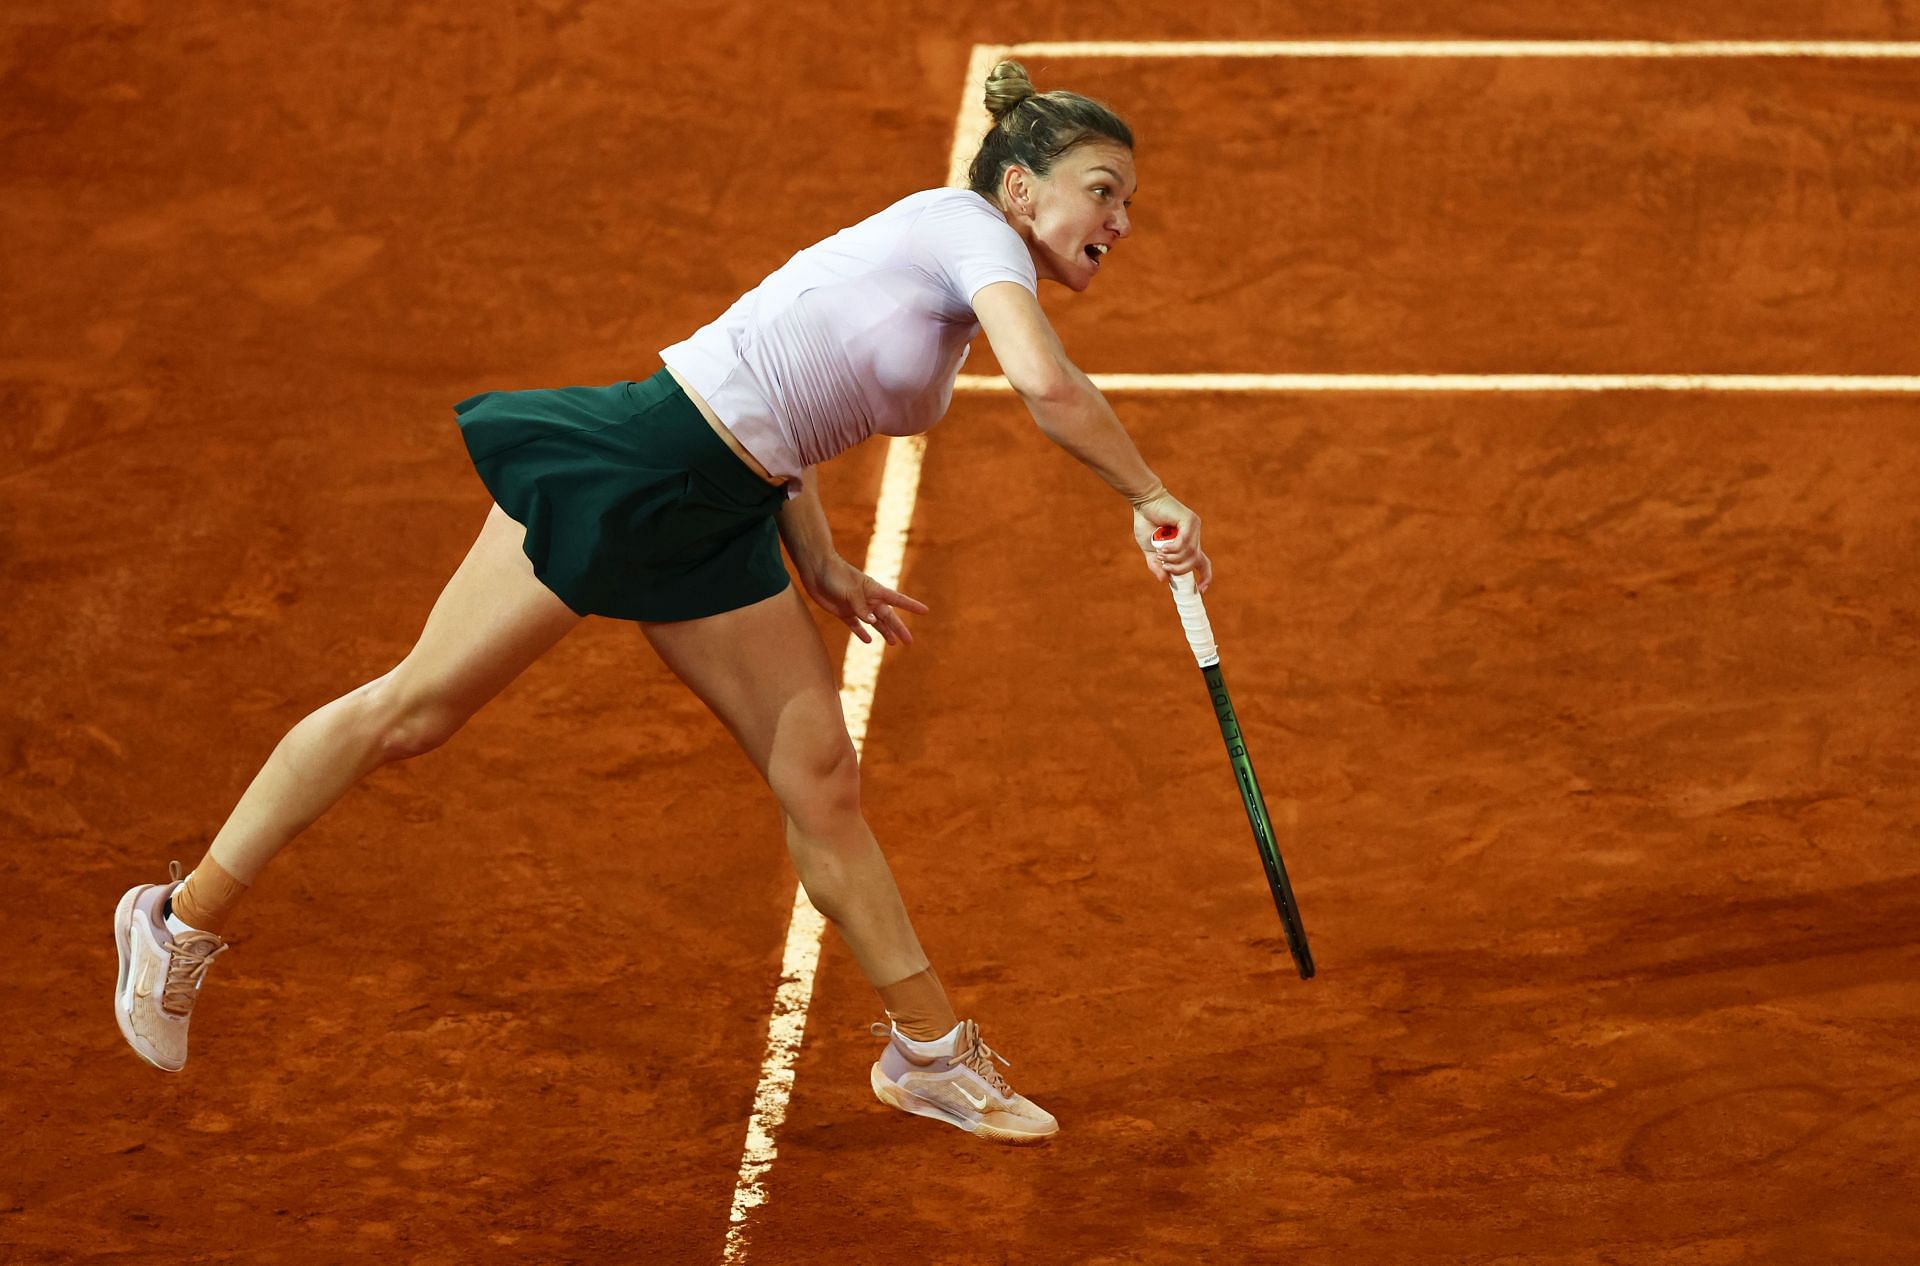 Halep at the Mutua Madrid Open 2022